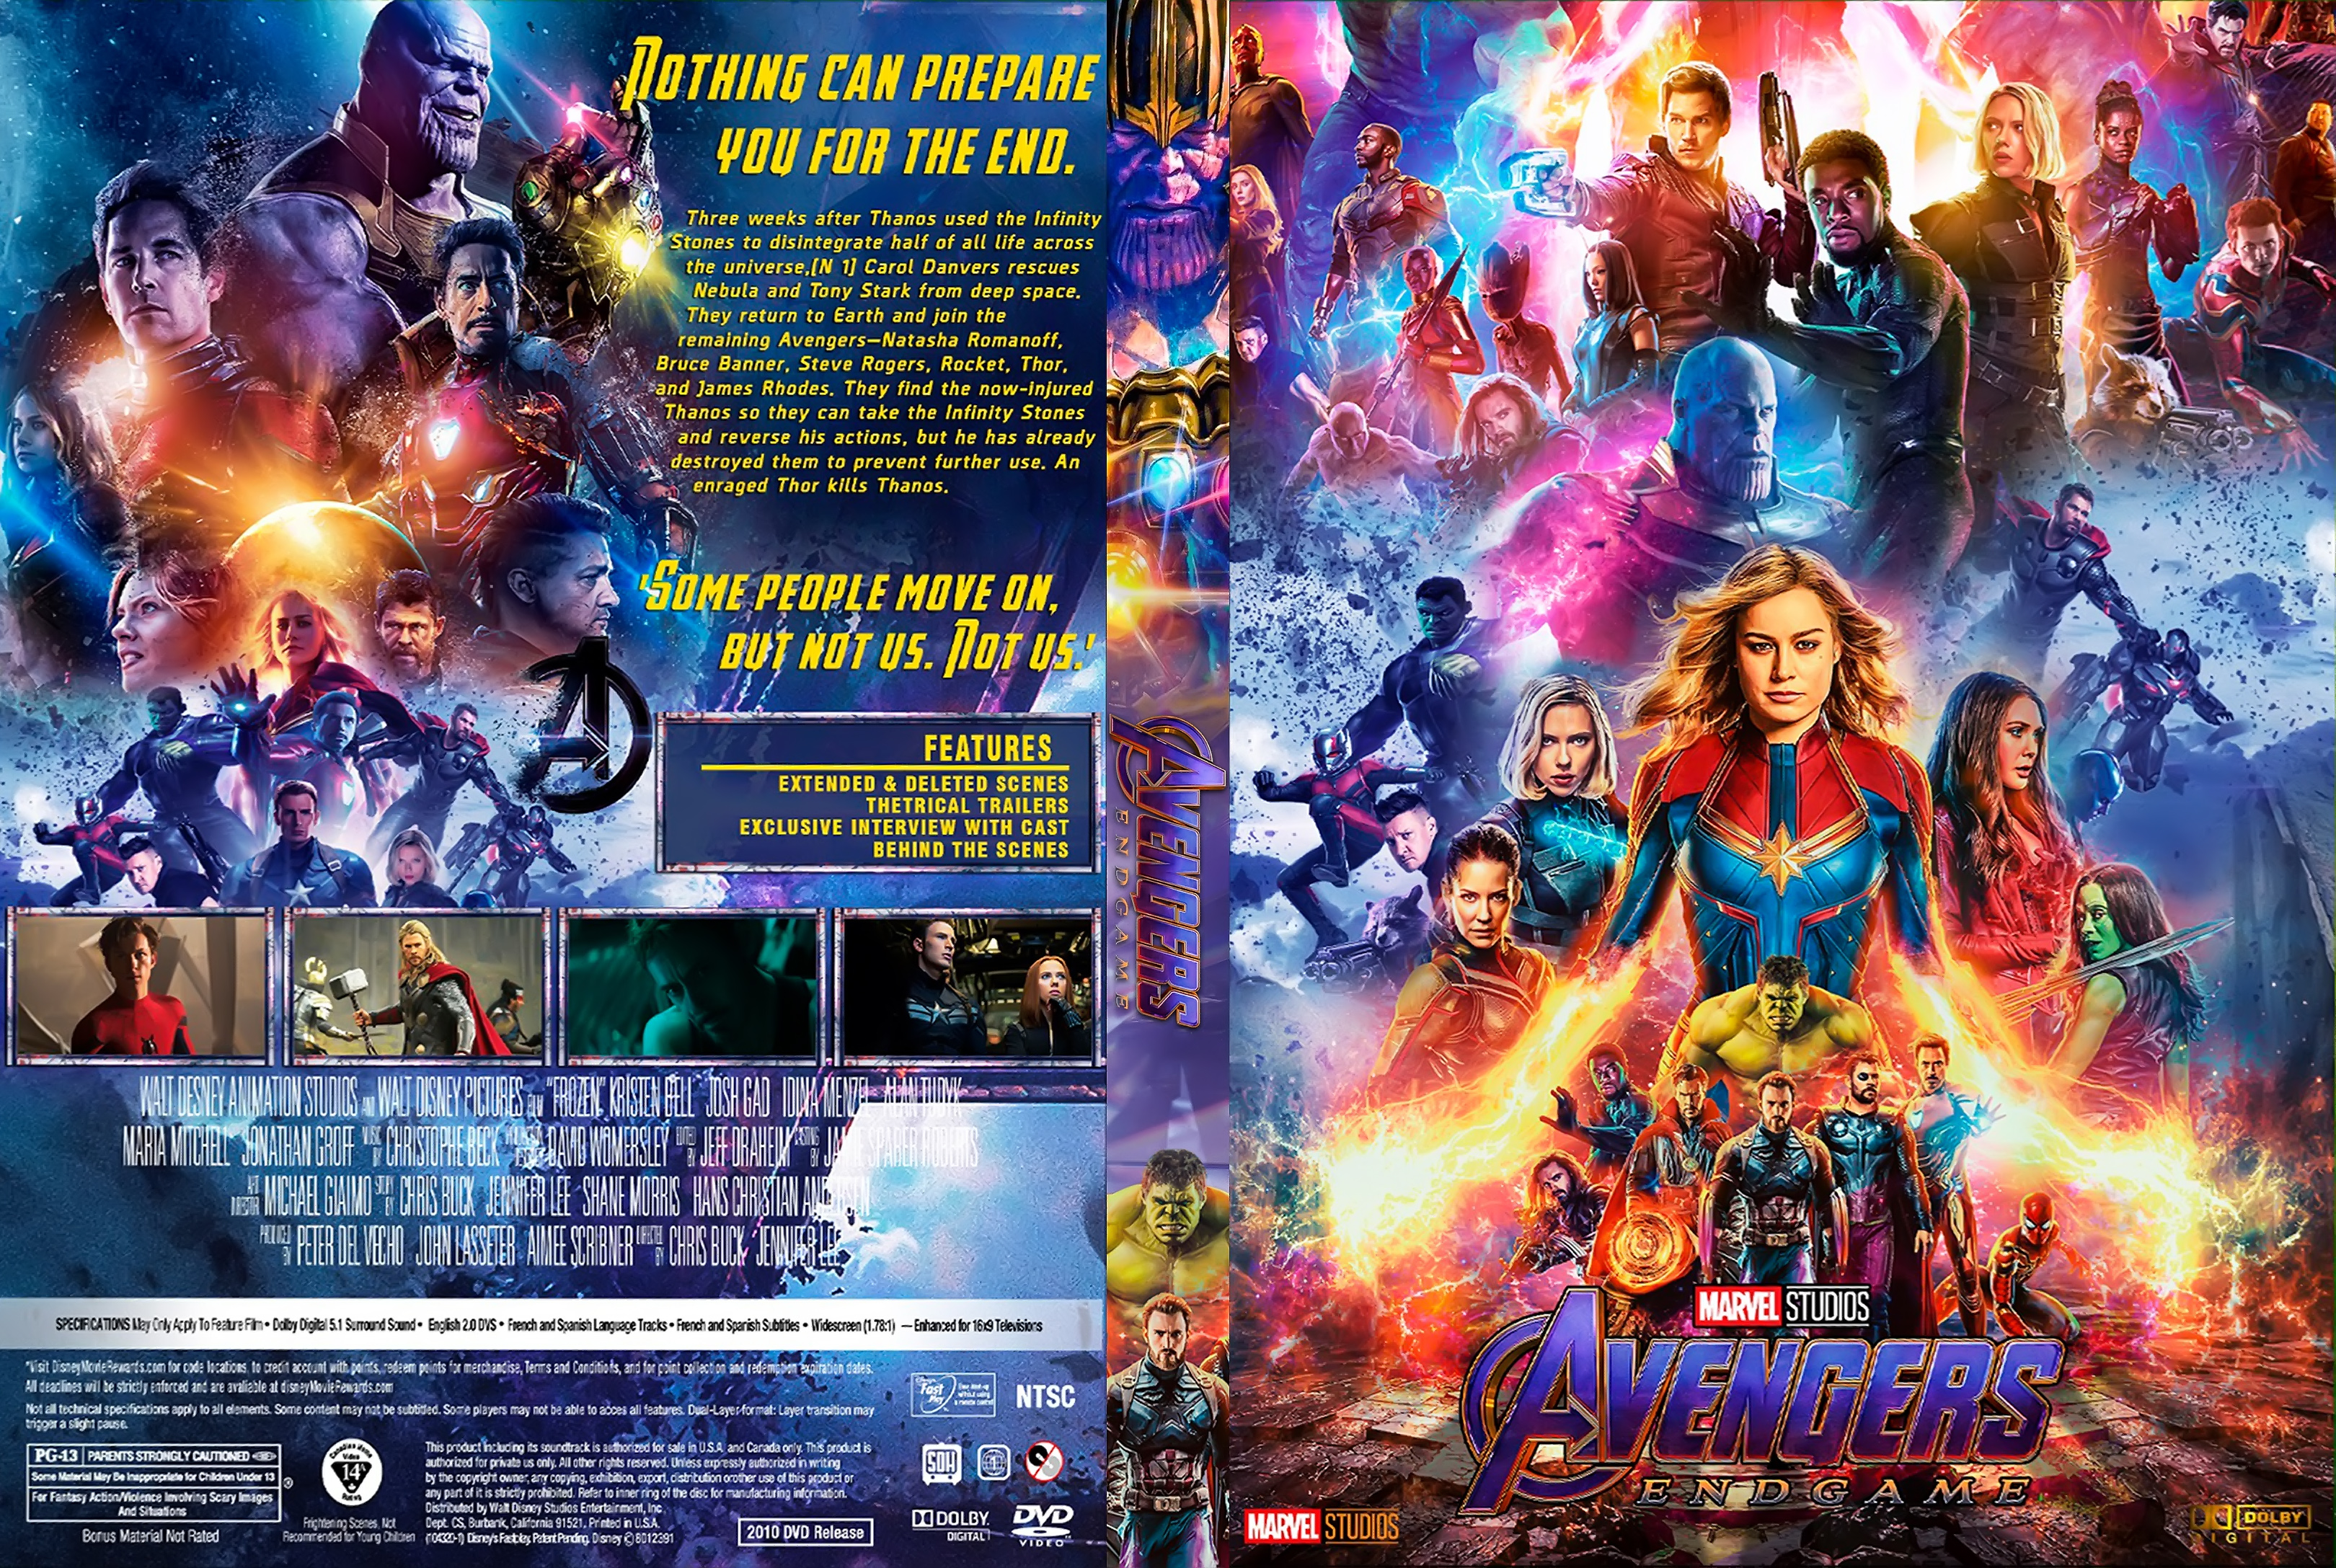 Avengers Endgame Watch Online Bluray and DVD